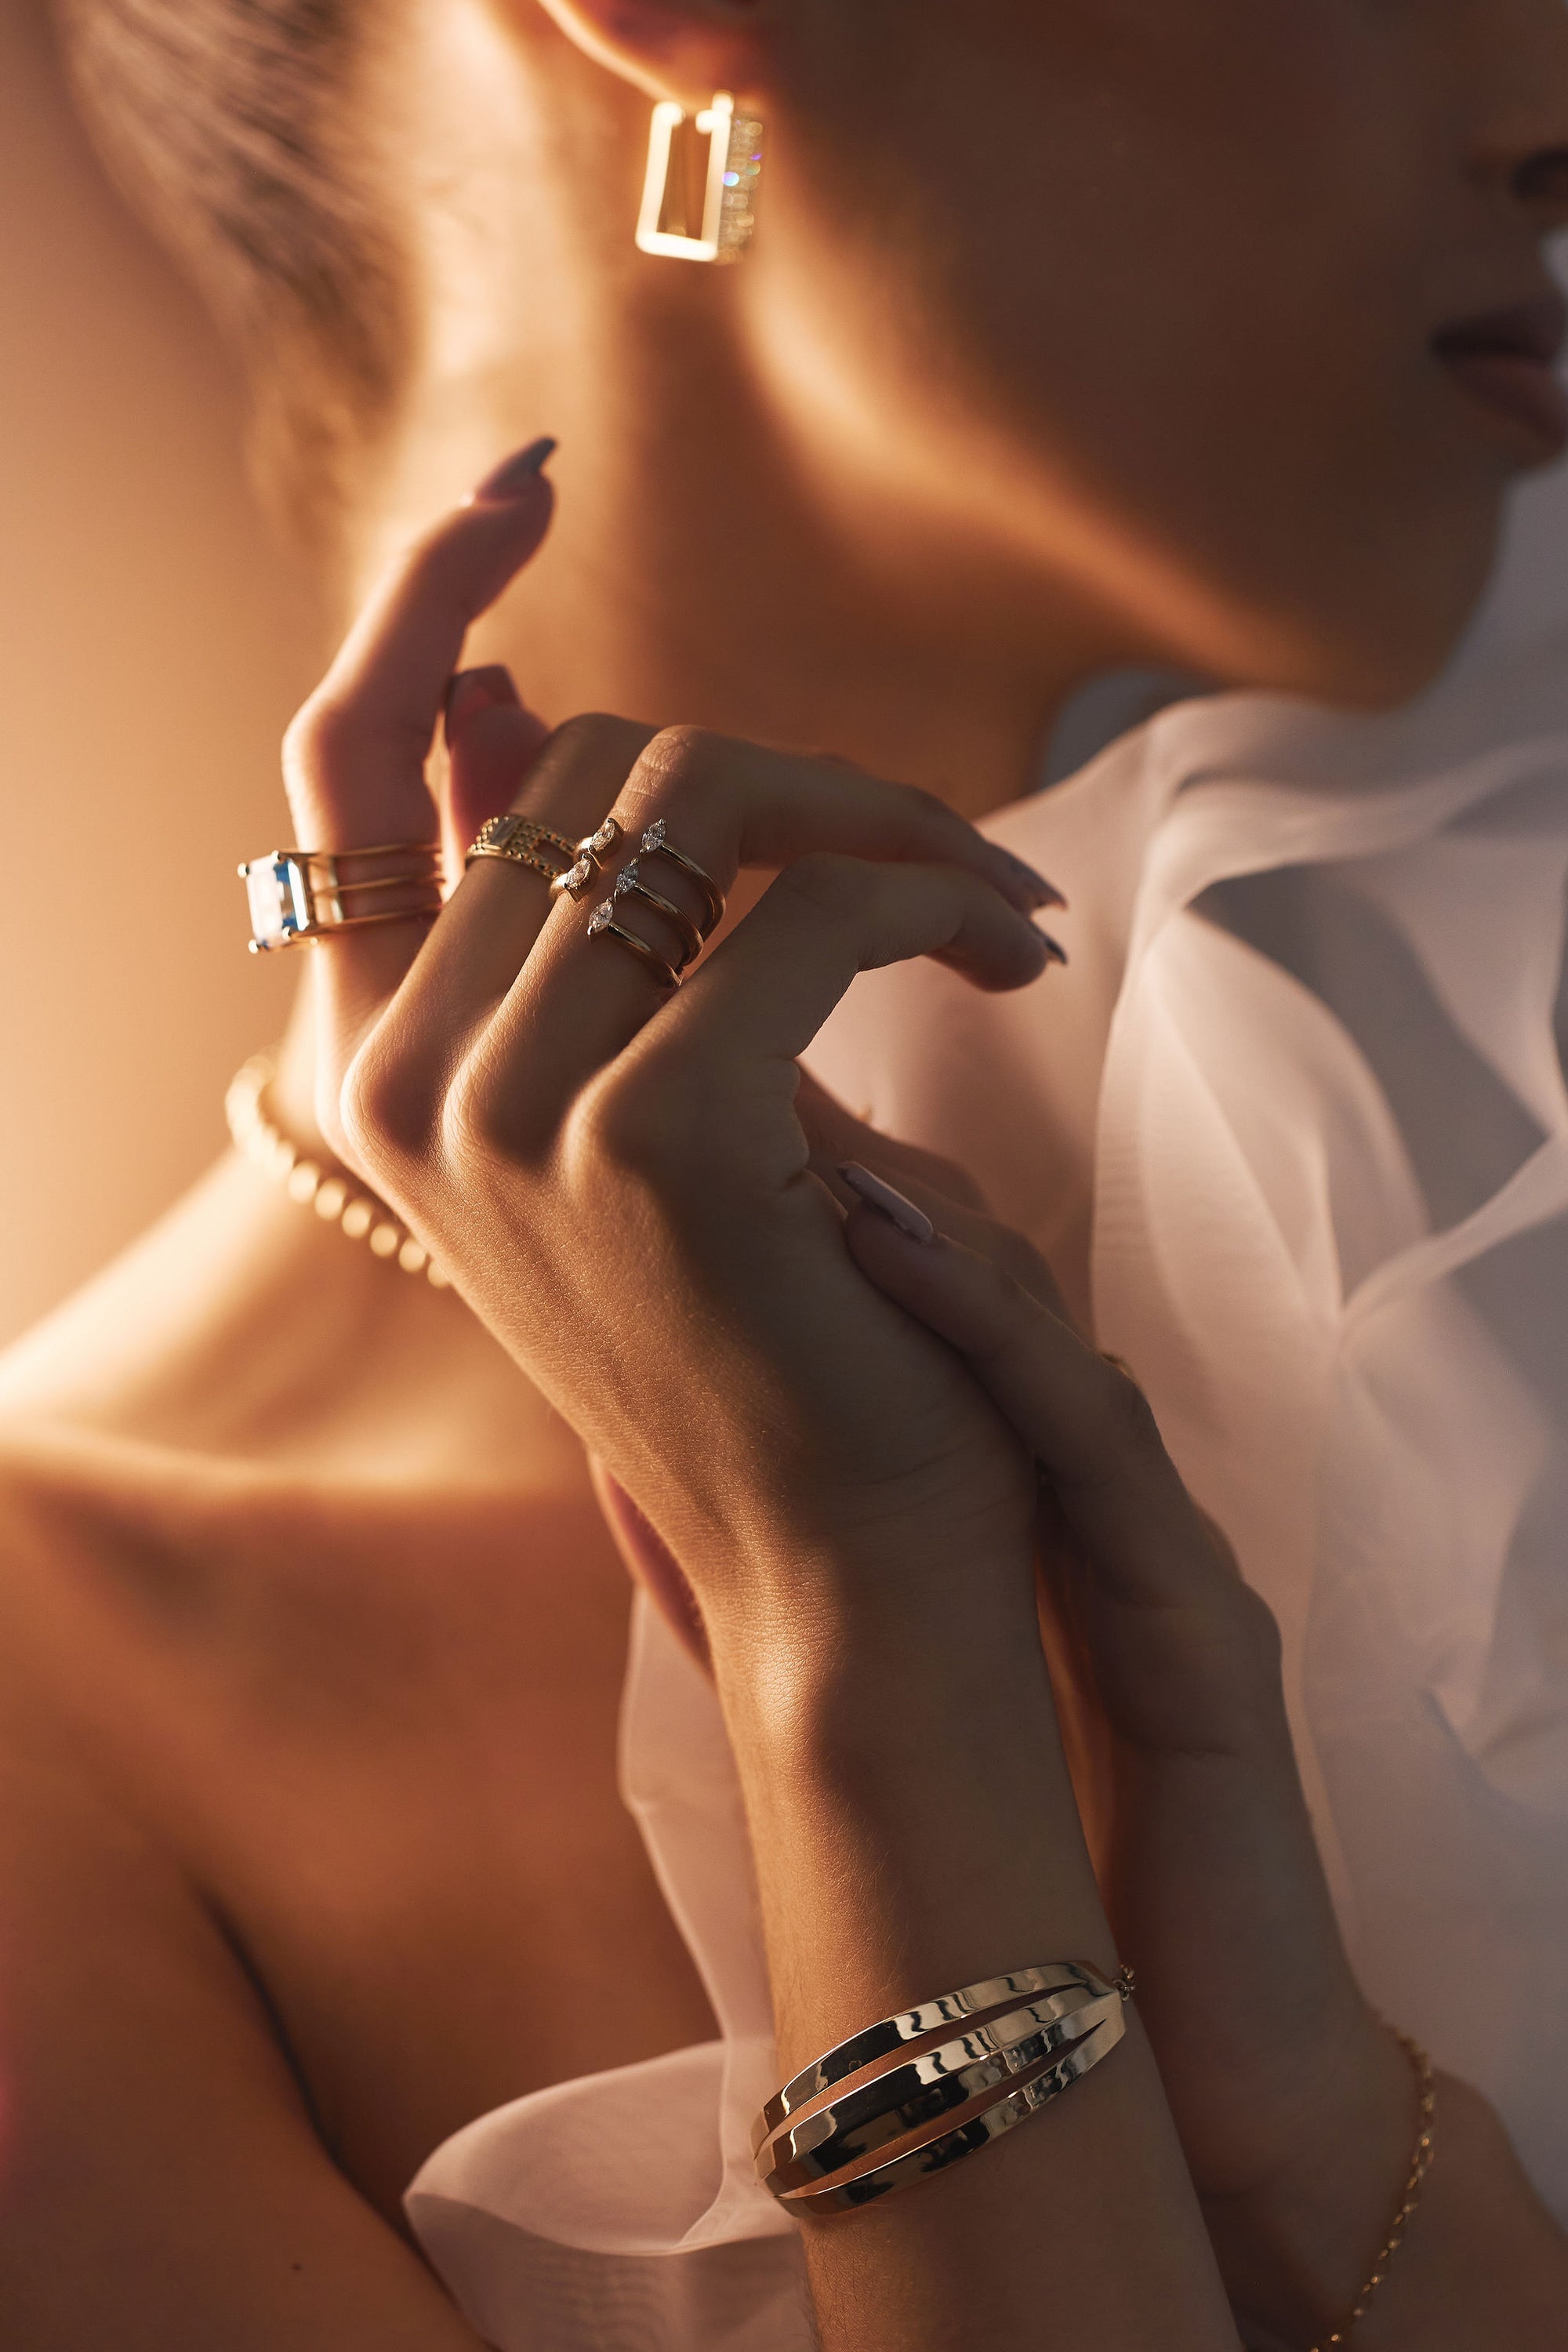 A woman adorned with elegant jewelry, including geometric earrings, multiple rings, a pearl necklace featuring an eye-catching sun charm, and the "Gold Bar - Bar and Chain Yellow Gold Bracelet" from Nijma M Fine Jewelry. She is posed with her hands gracefully touching near her face, wearing a white ruffled garment illuminated by soft, warm light.